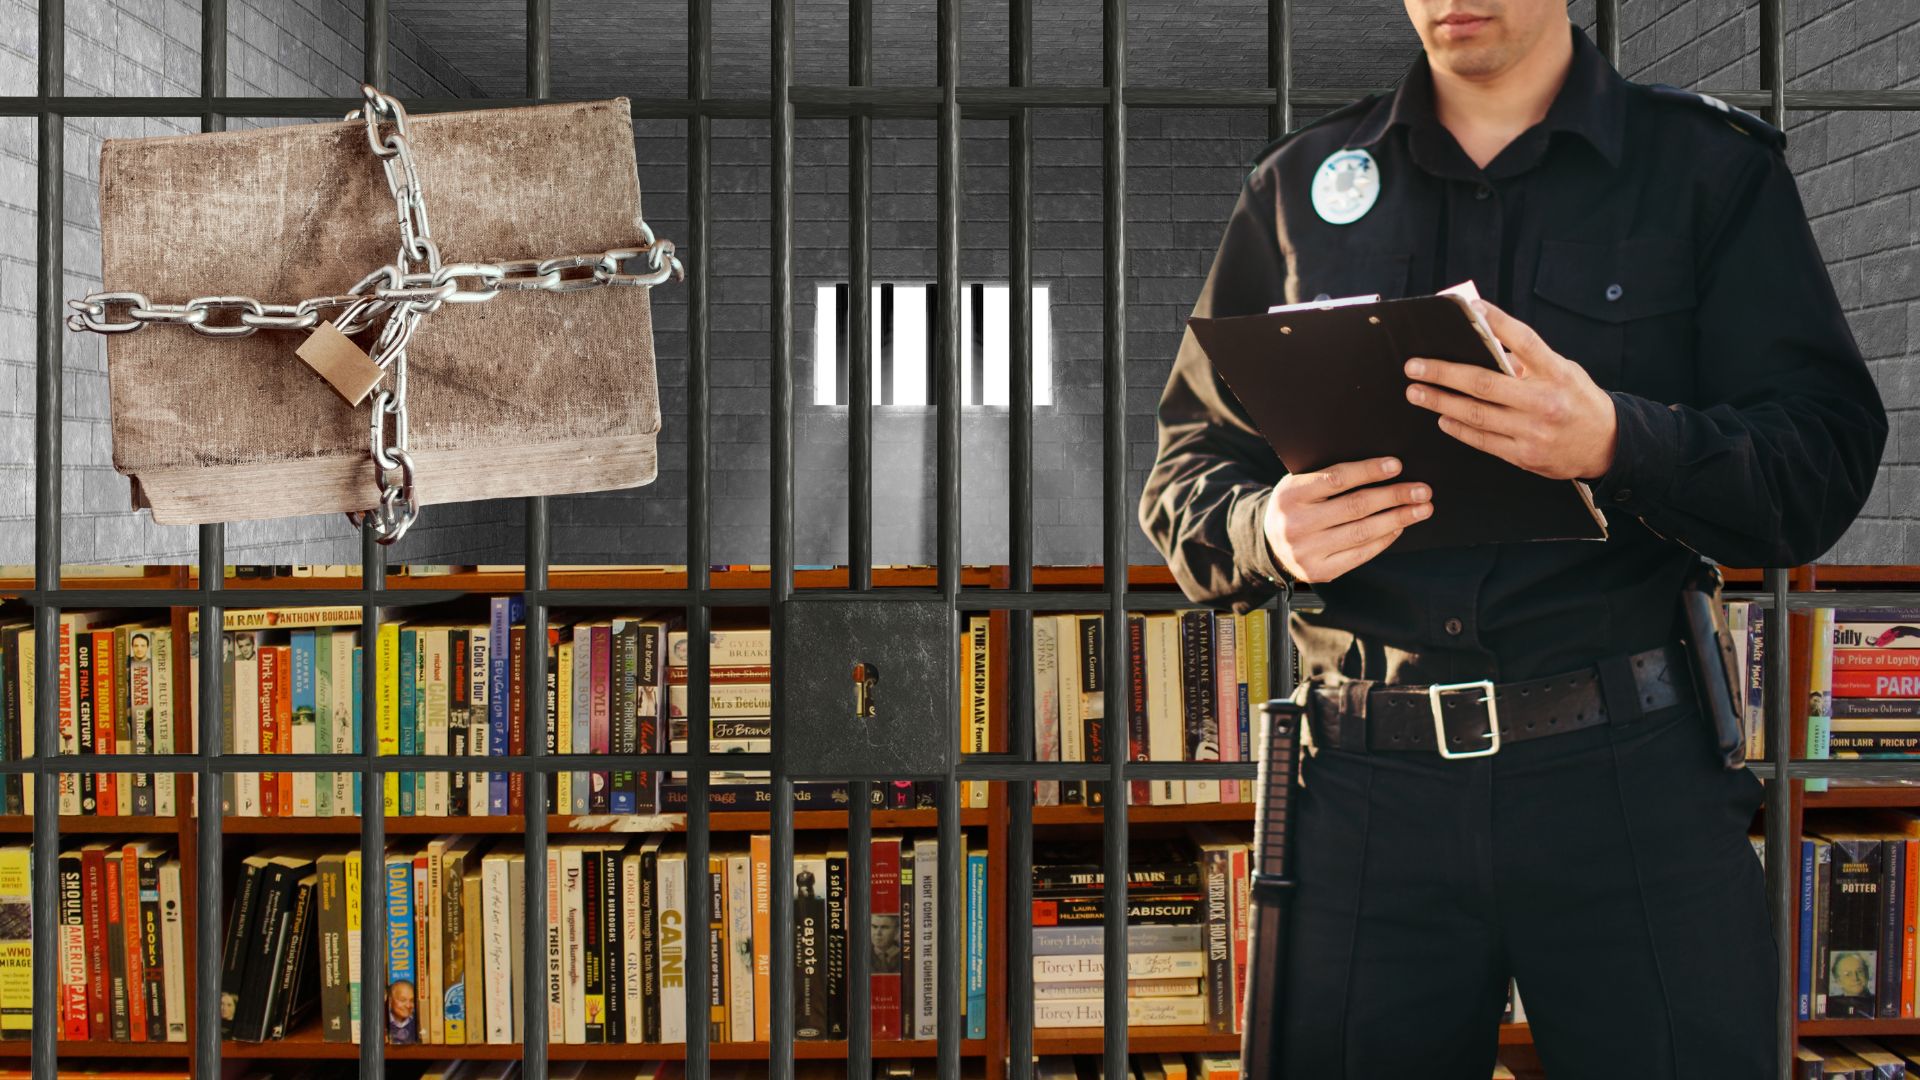 Featured Image with a bookshelf behind bars and a cop writing a ticket.